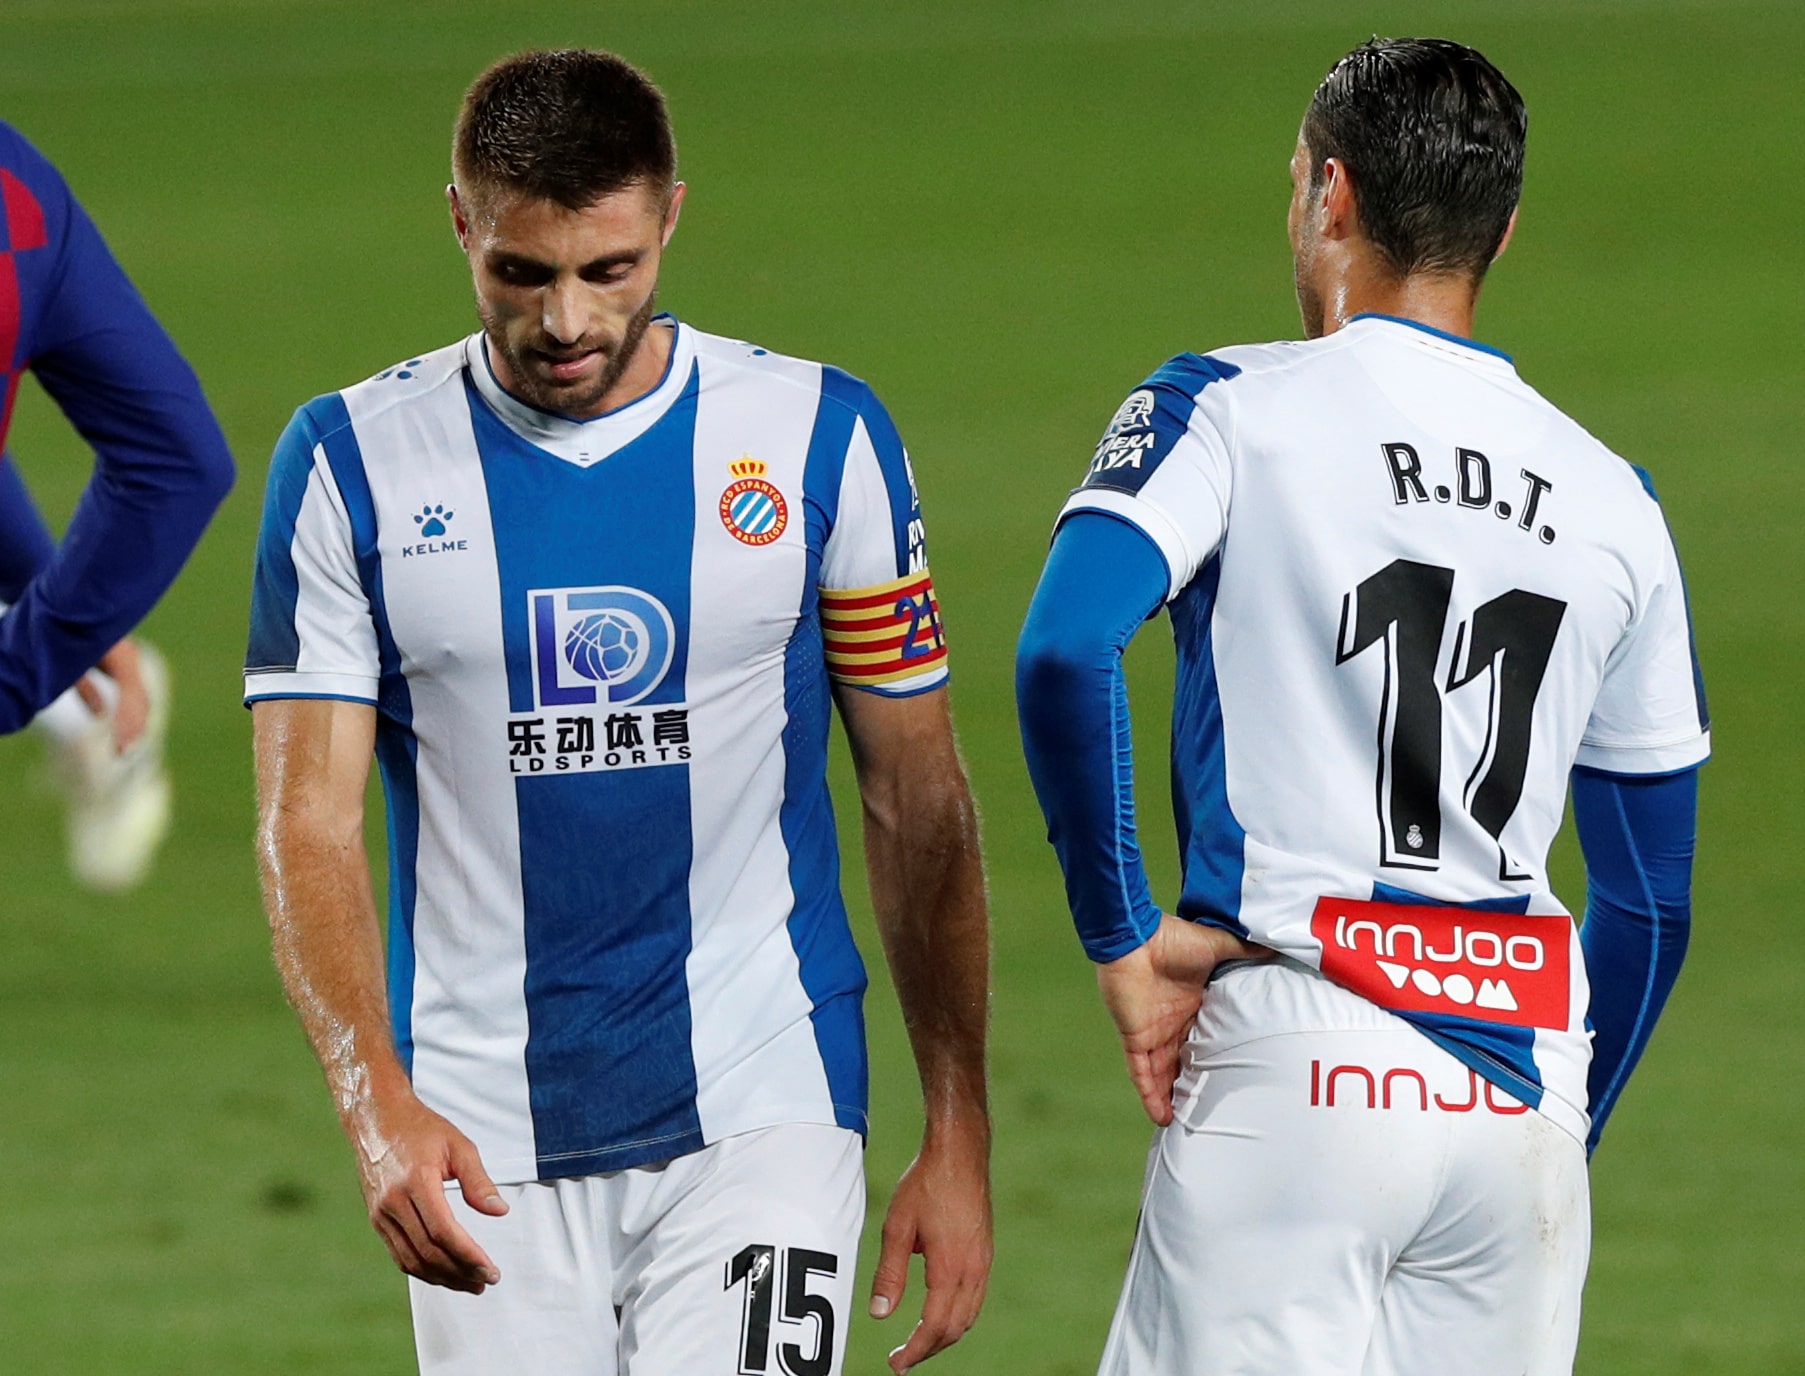 Espanyol's David López and Raúl de Tomás dejected as Espanyol lose to Barcelona, sealing their relegation to the second division (by REUTERS/Albert Gea)